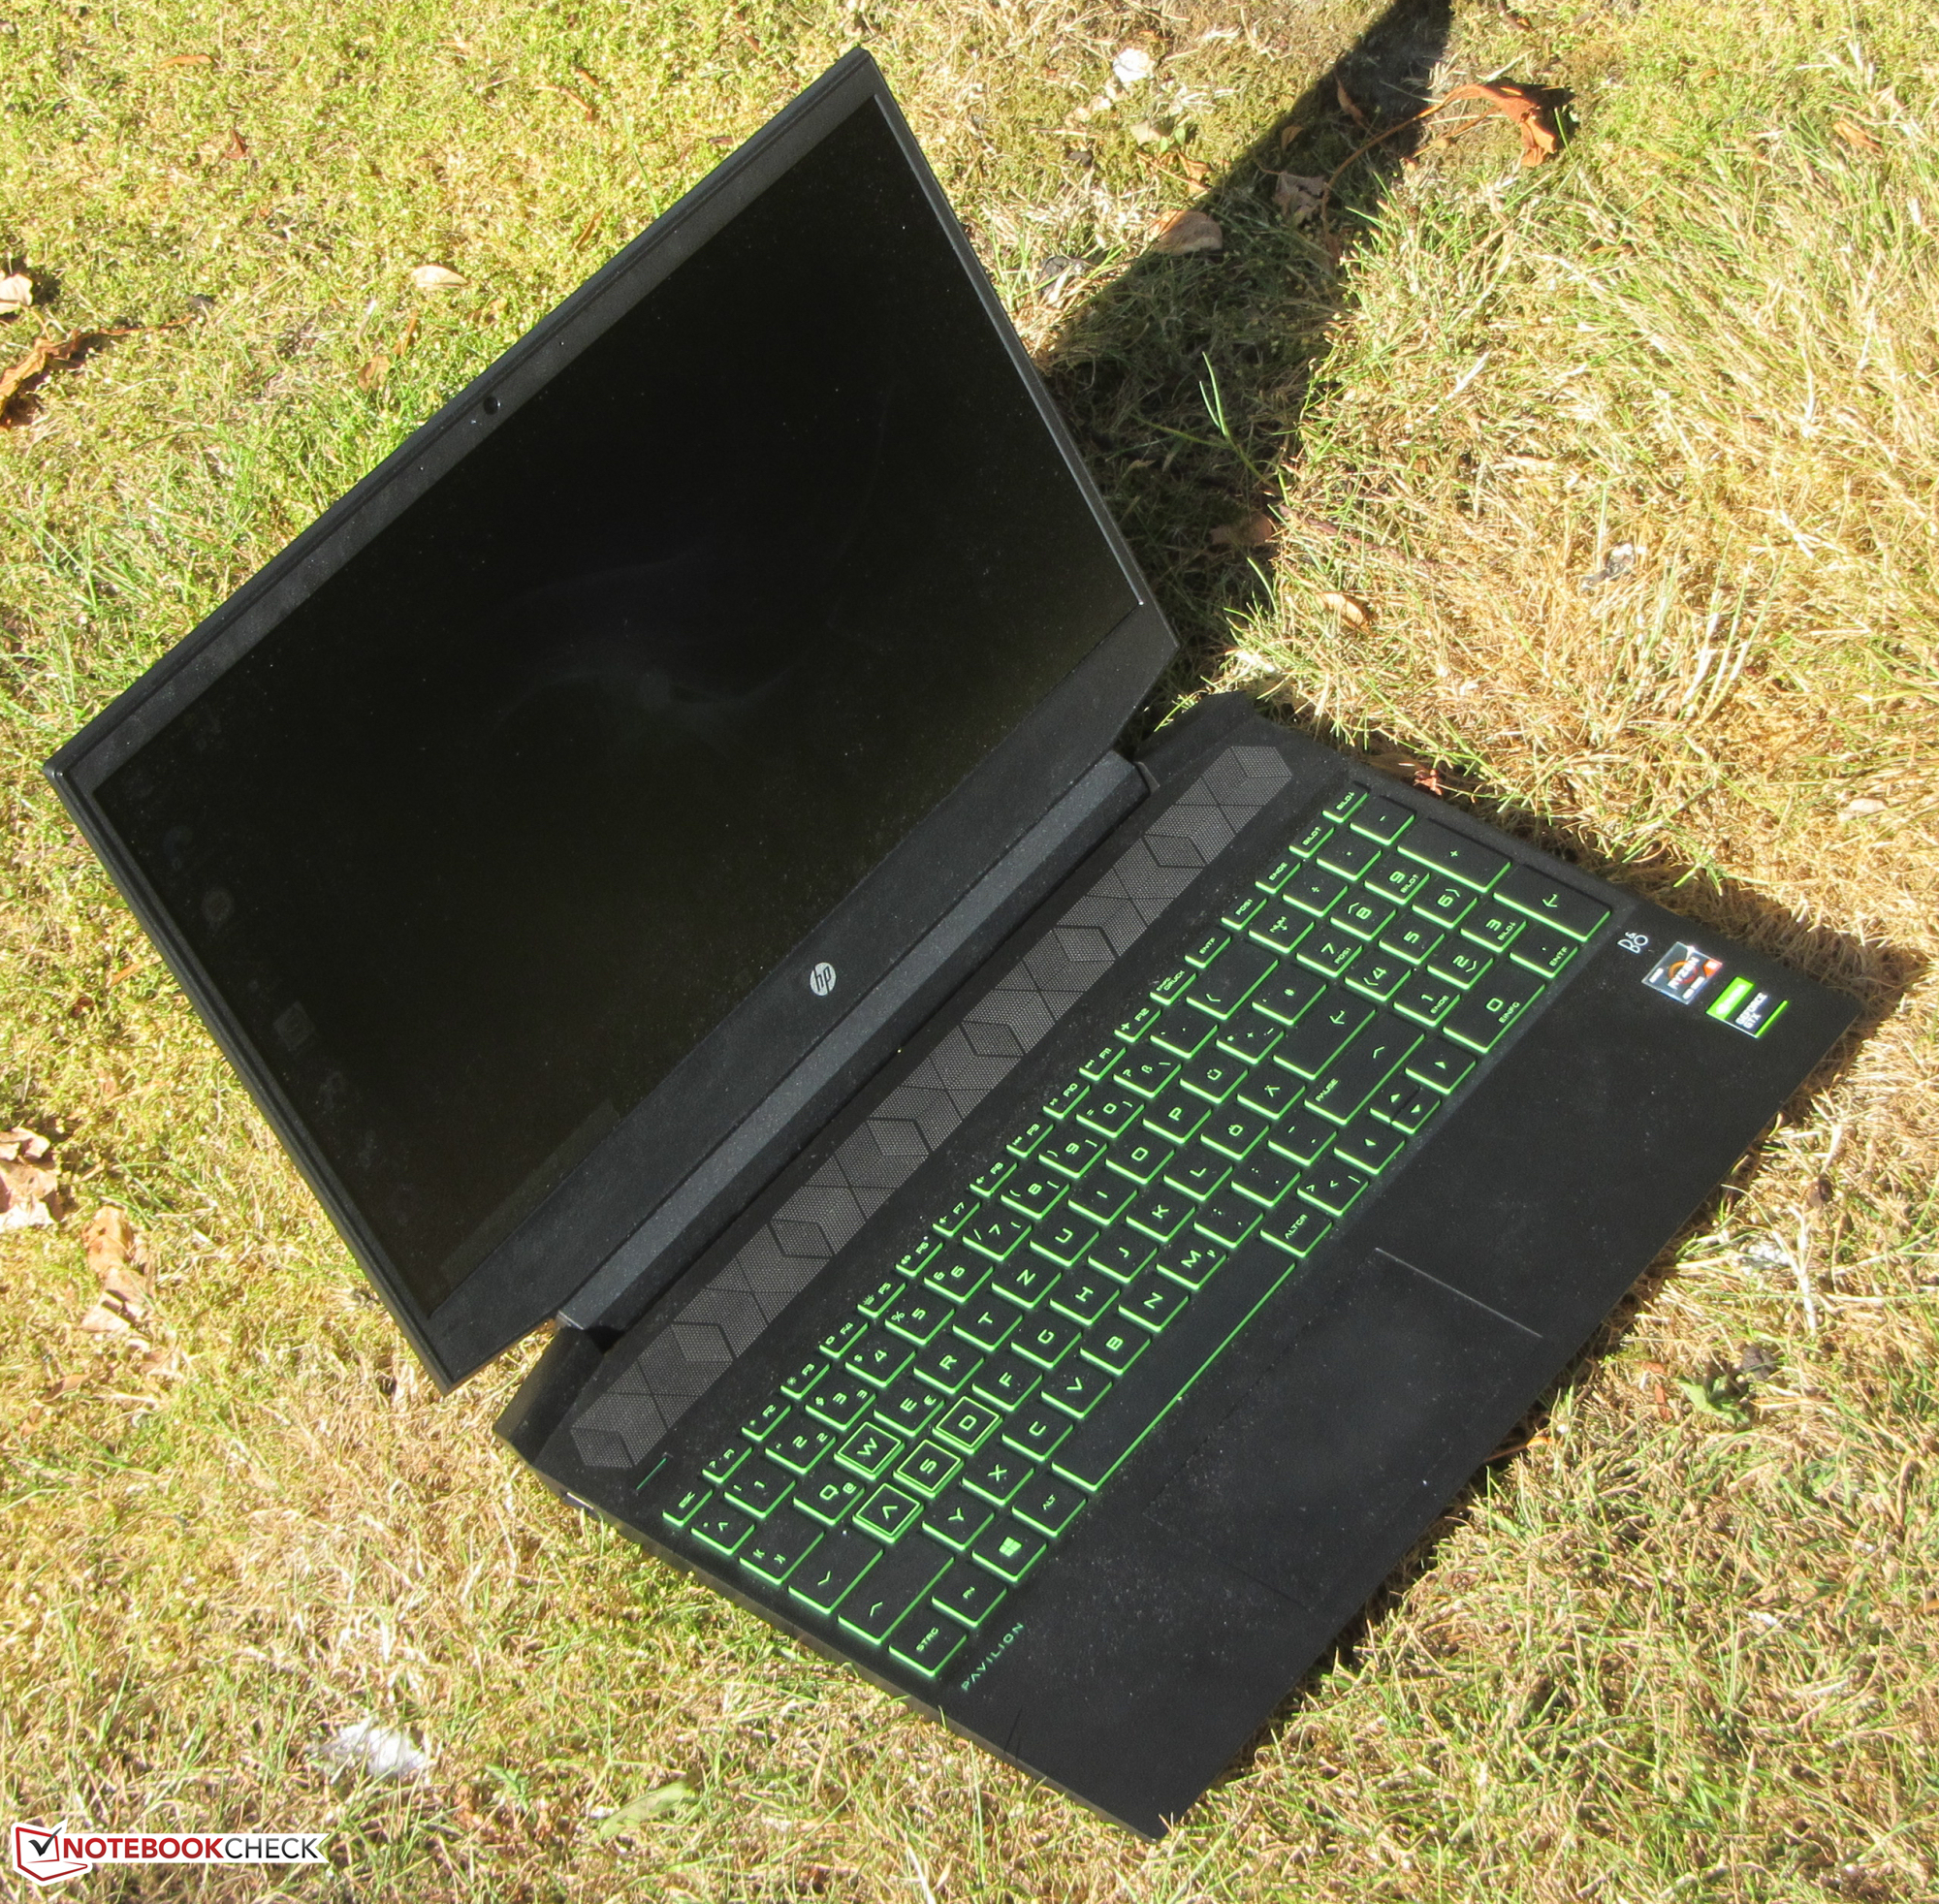 HP Pavilion Gaming Laptop (2018) review: Plays harder than its